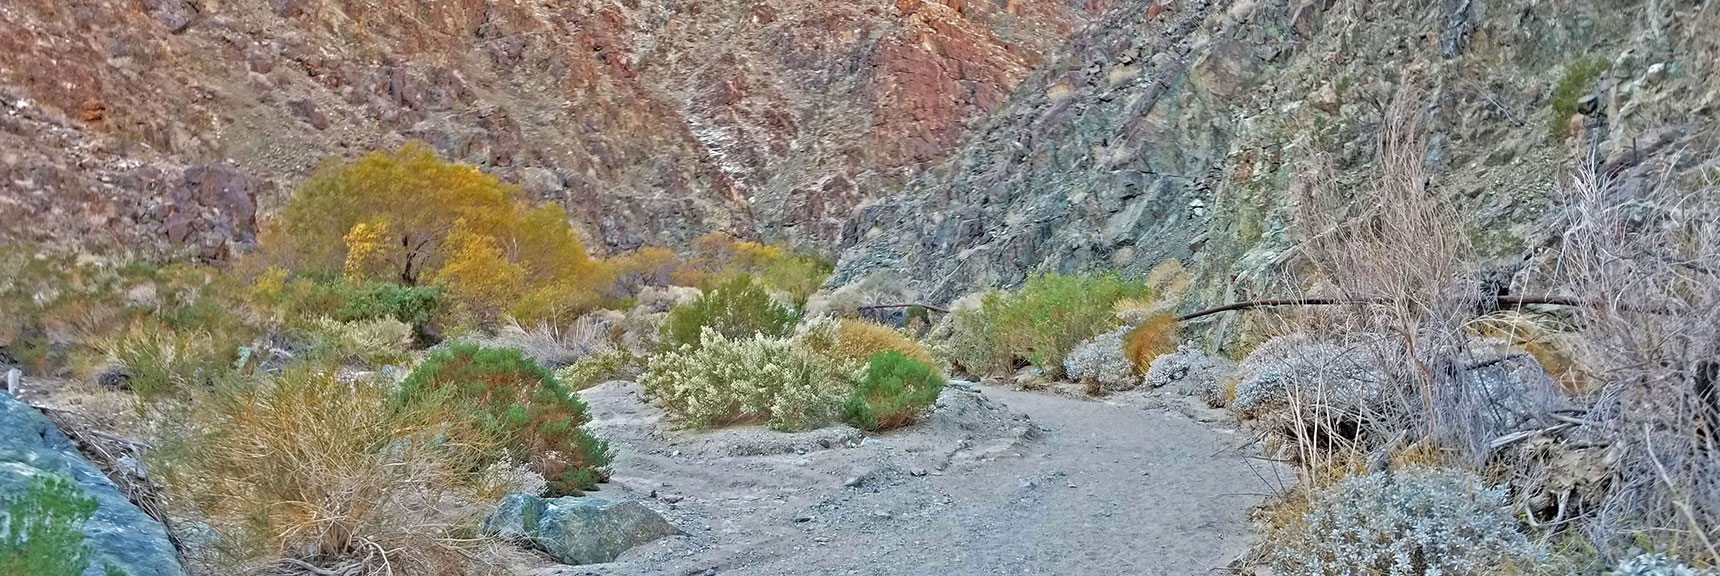 Continuing on the Right Side of the Canyon Near the Water Pipe. | Darwin Falls, Death Valley National Park, California